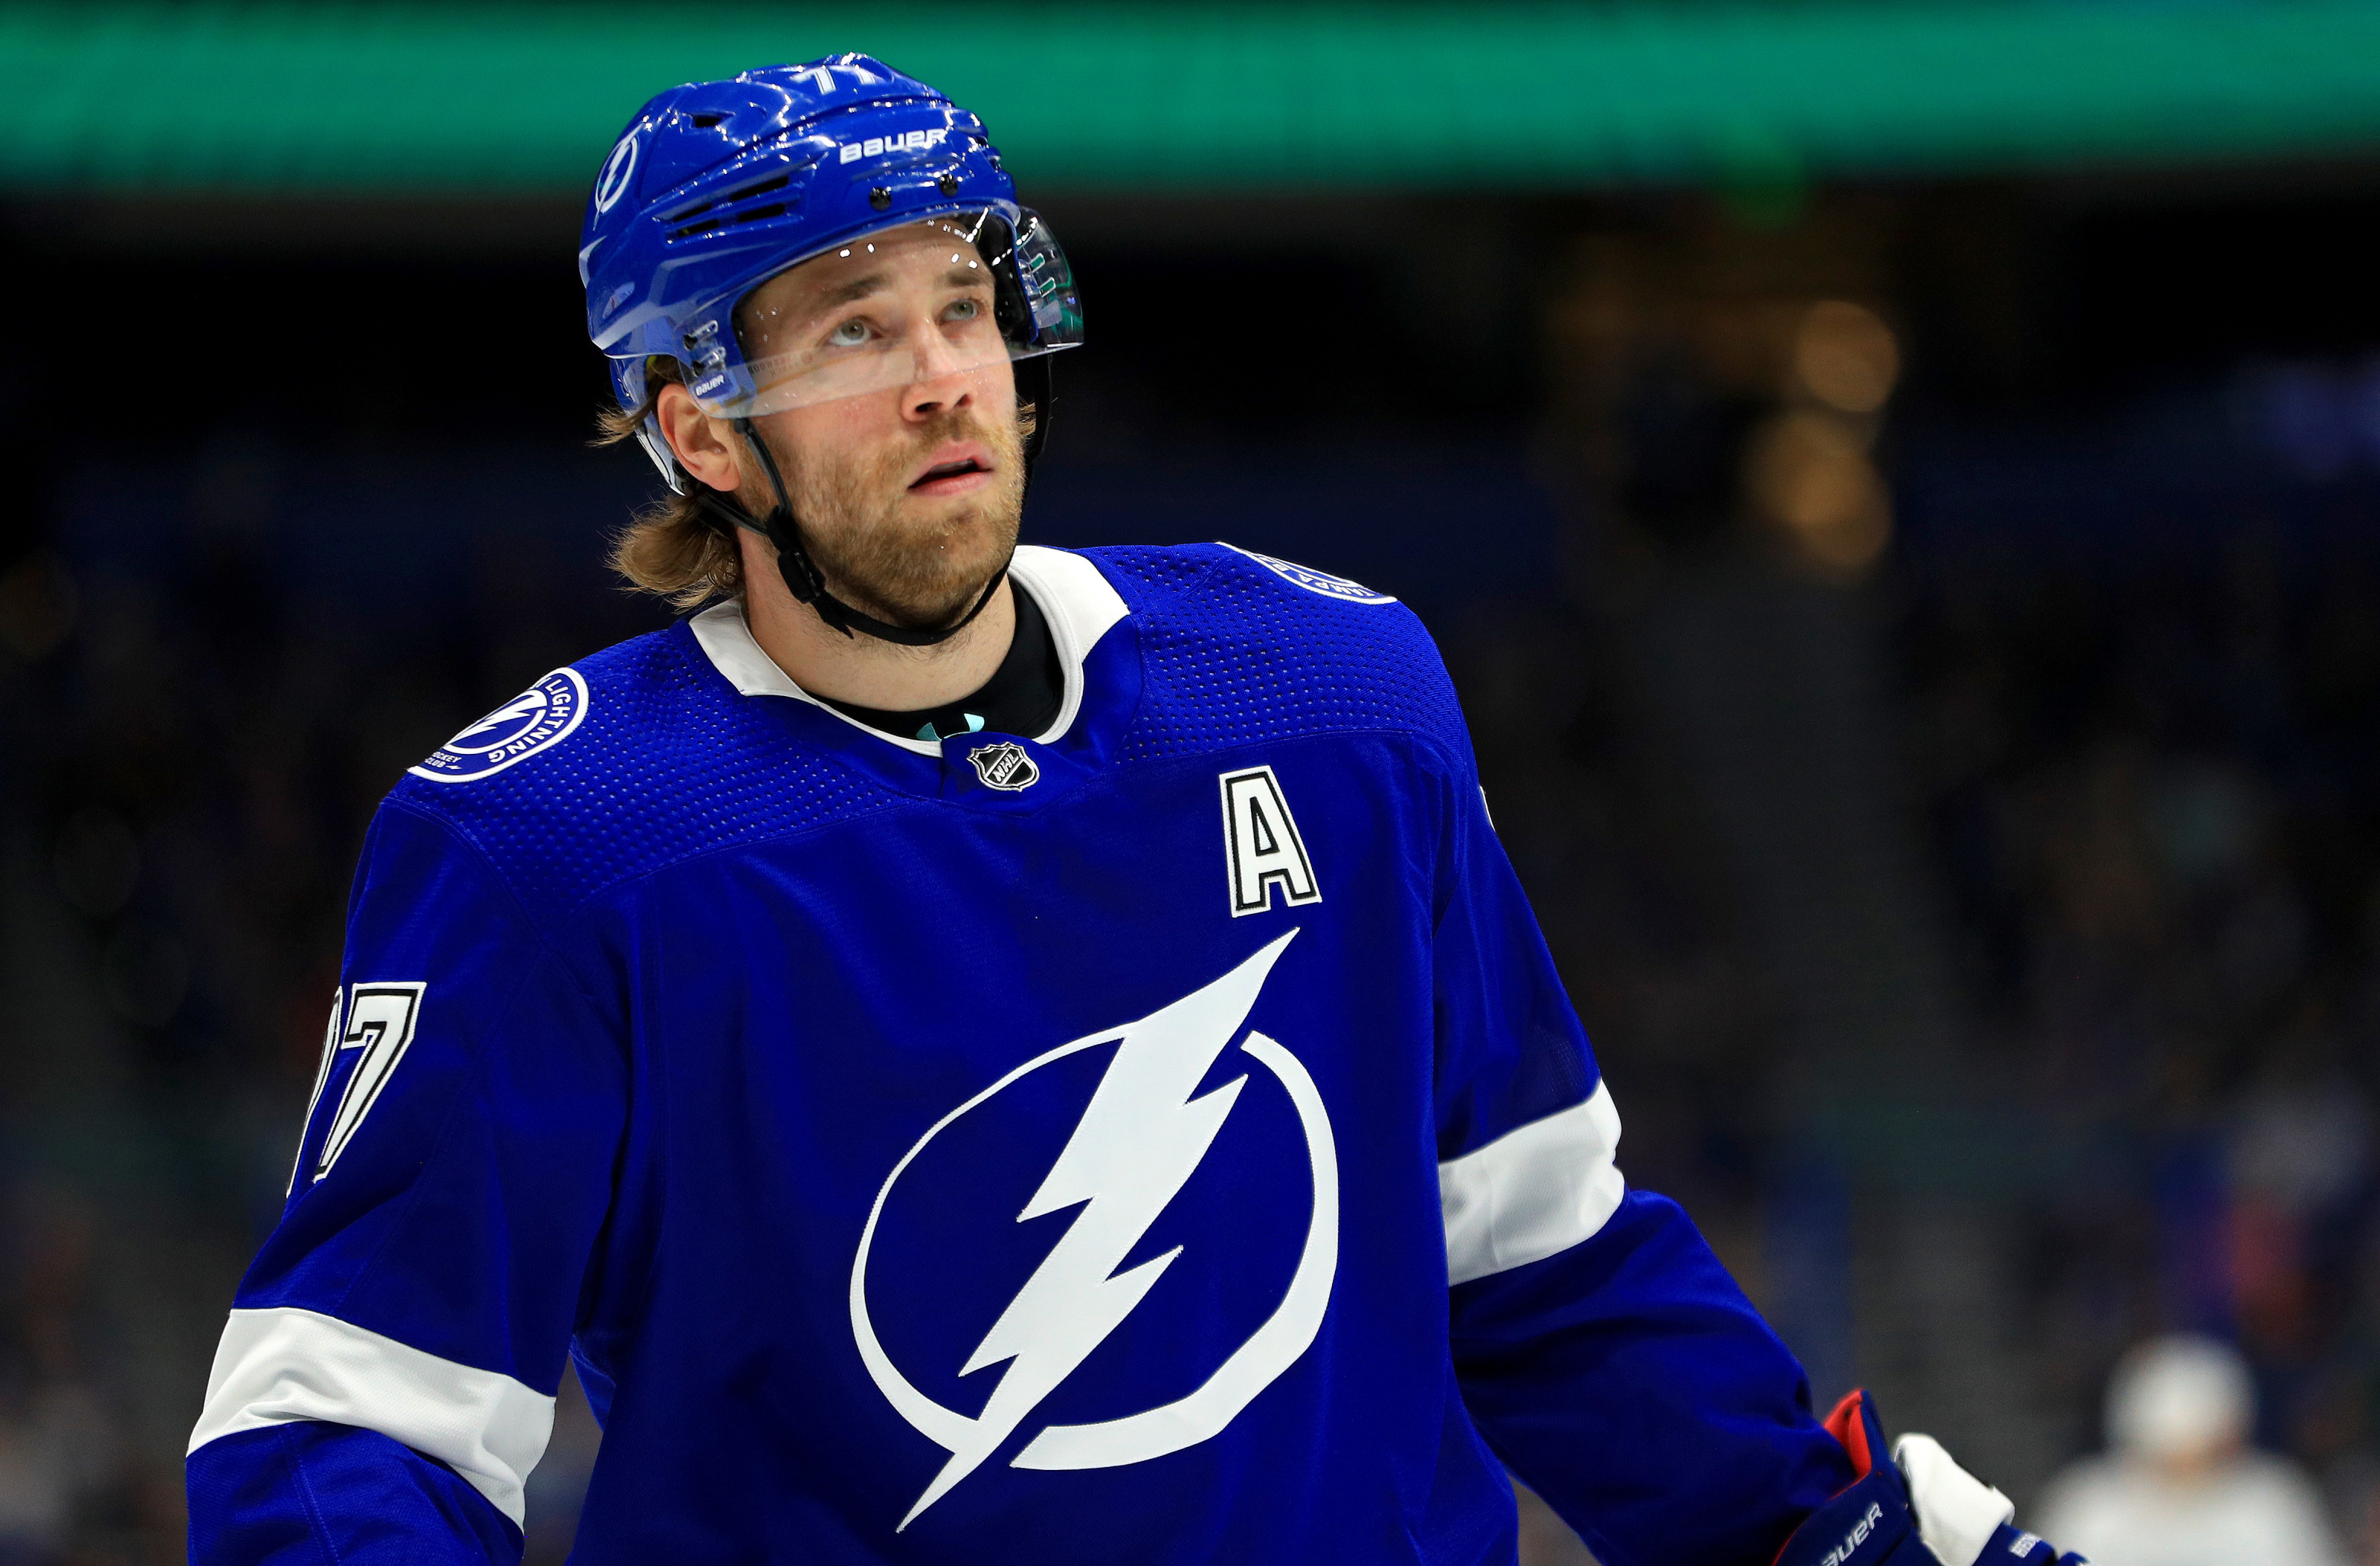 Victor hedman Stock Photos and Images